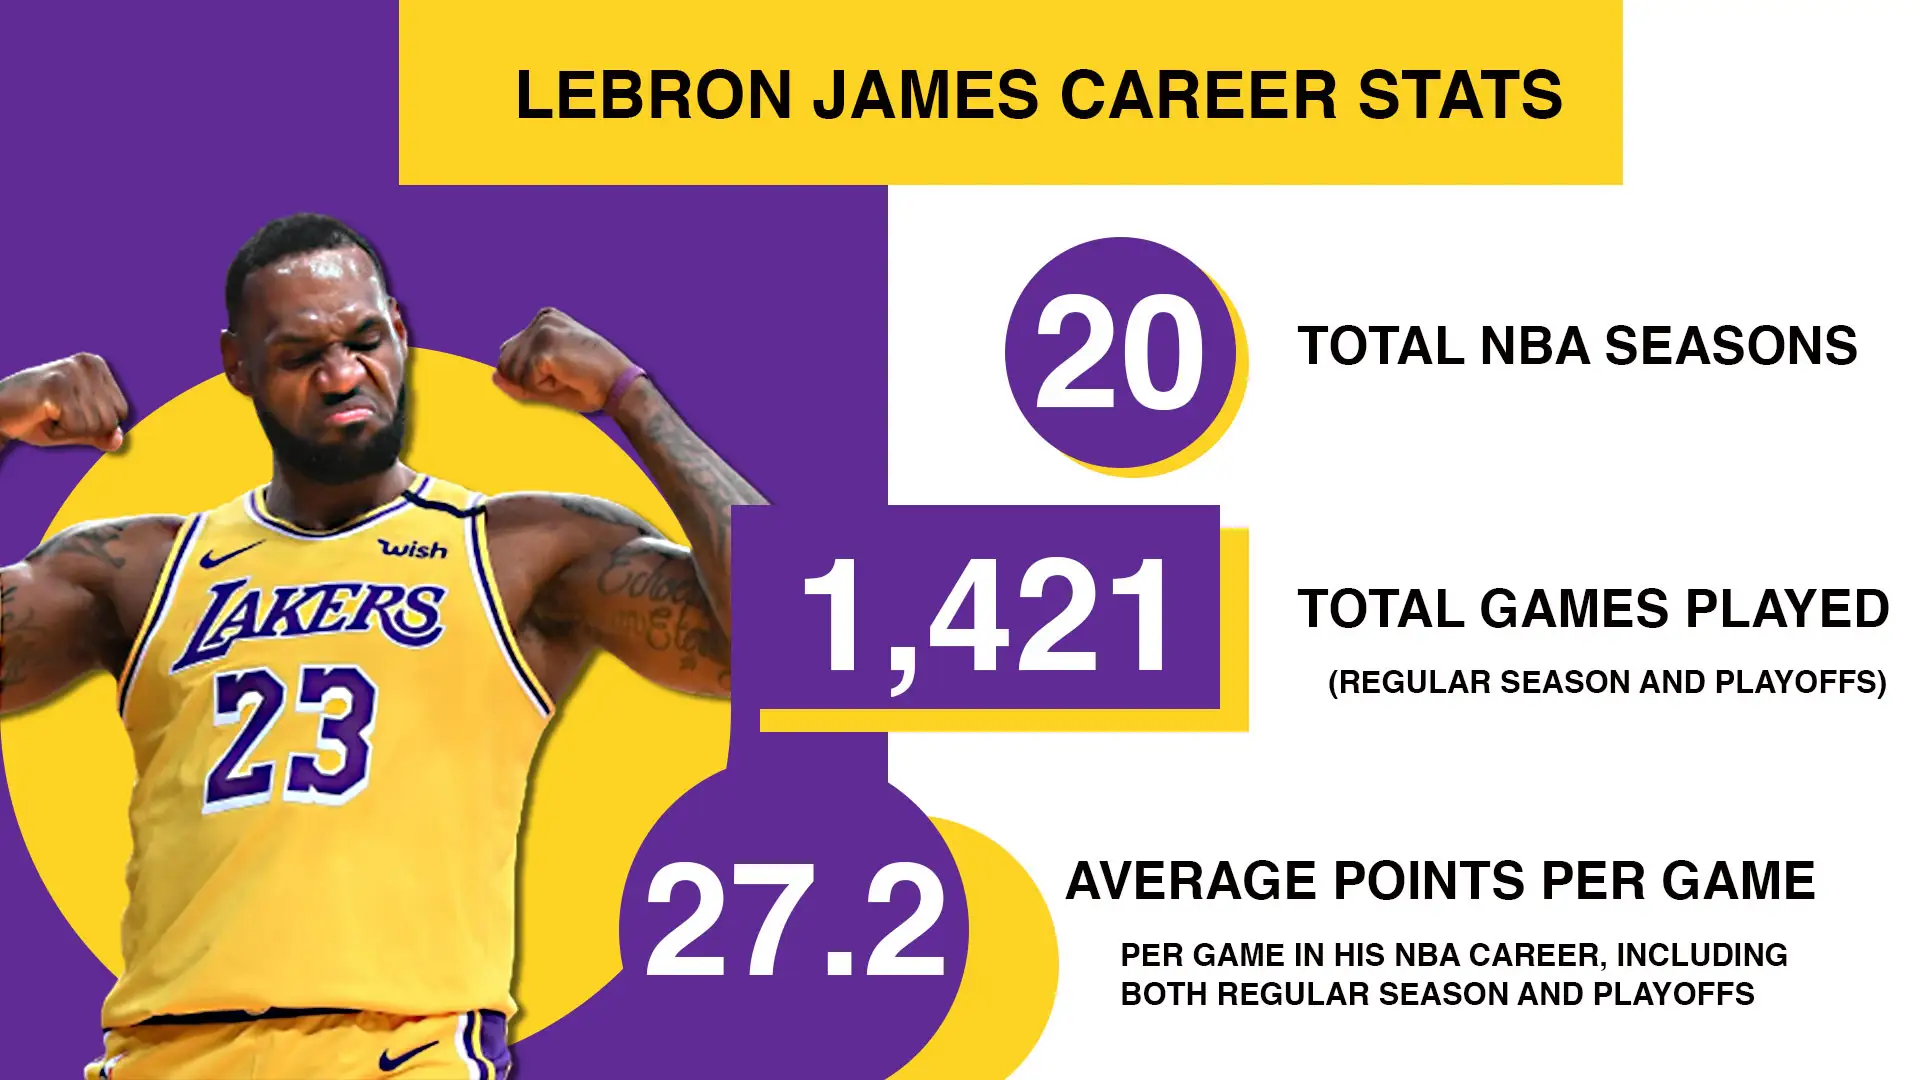 Lebron James basketball stats - playoff , high school, career points